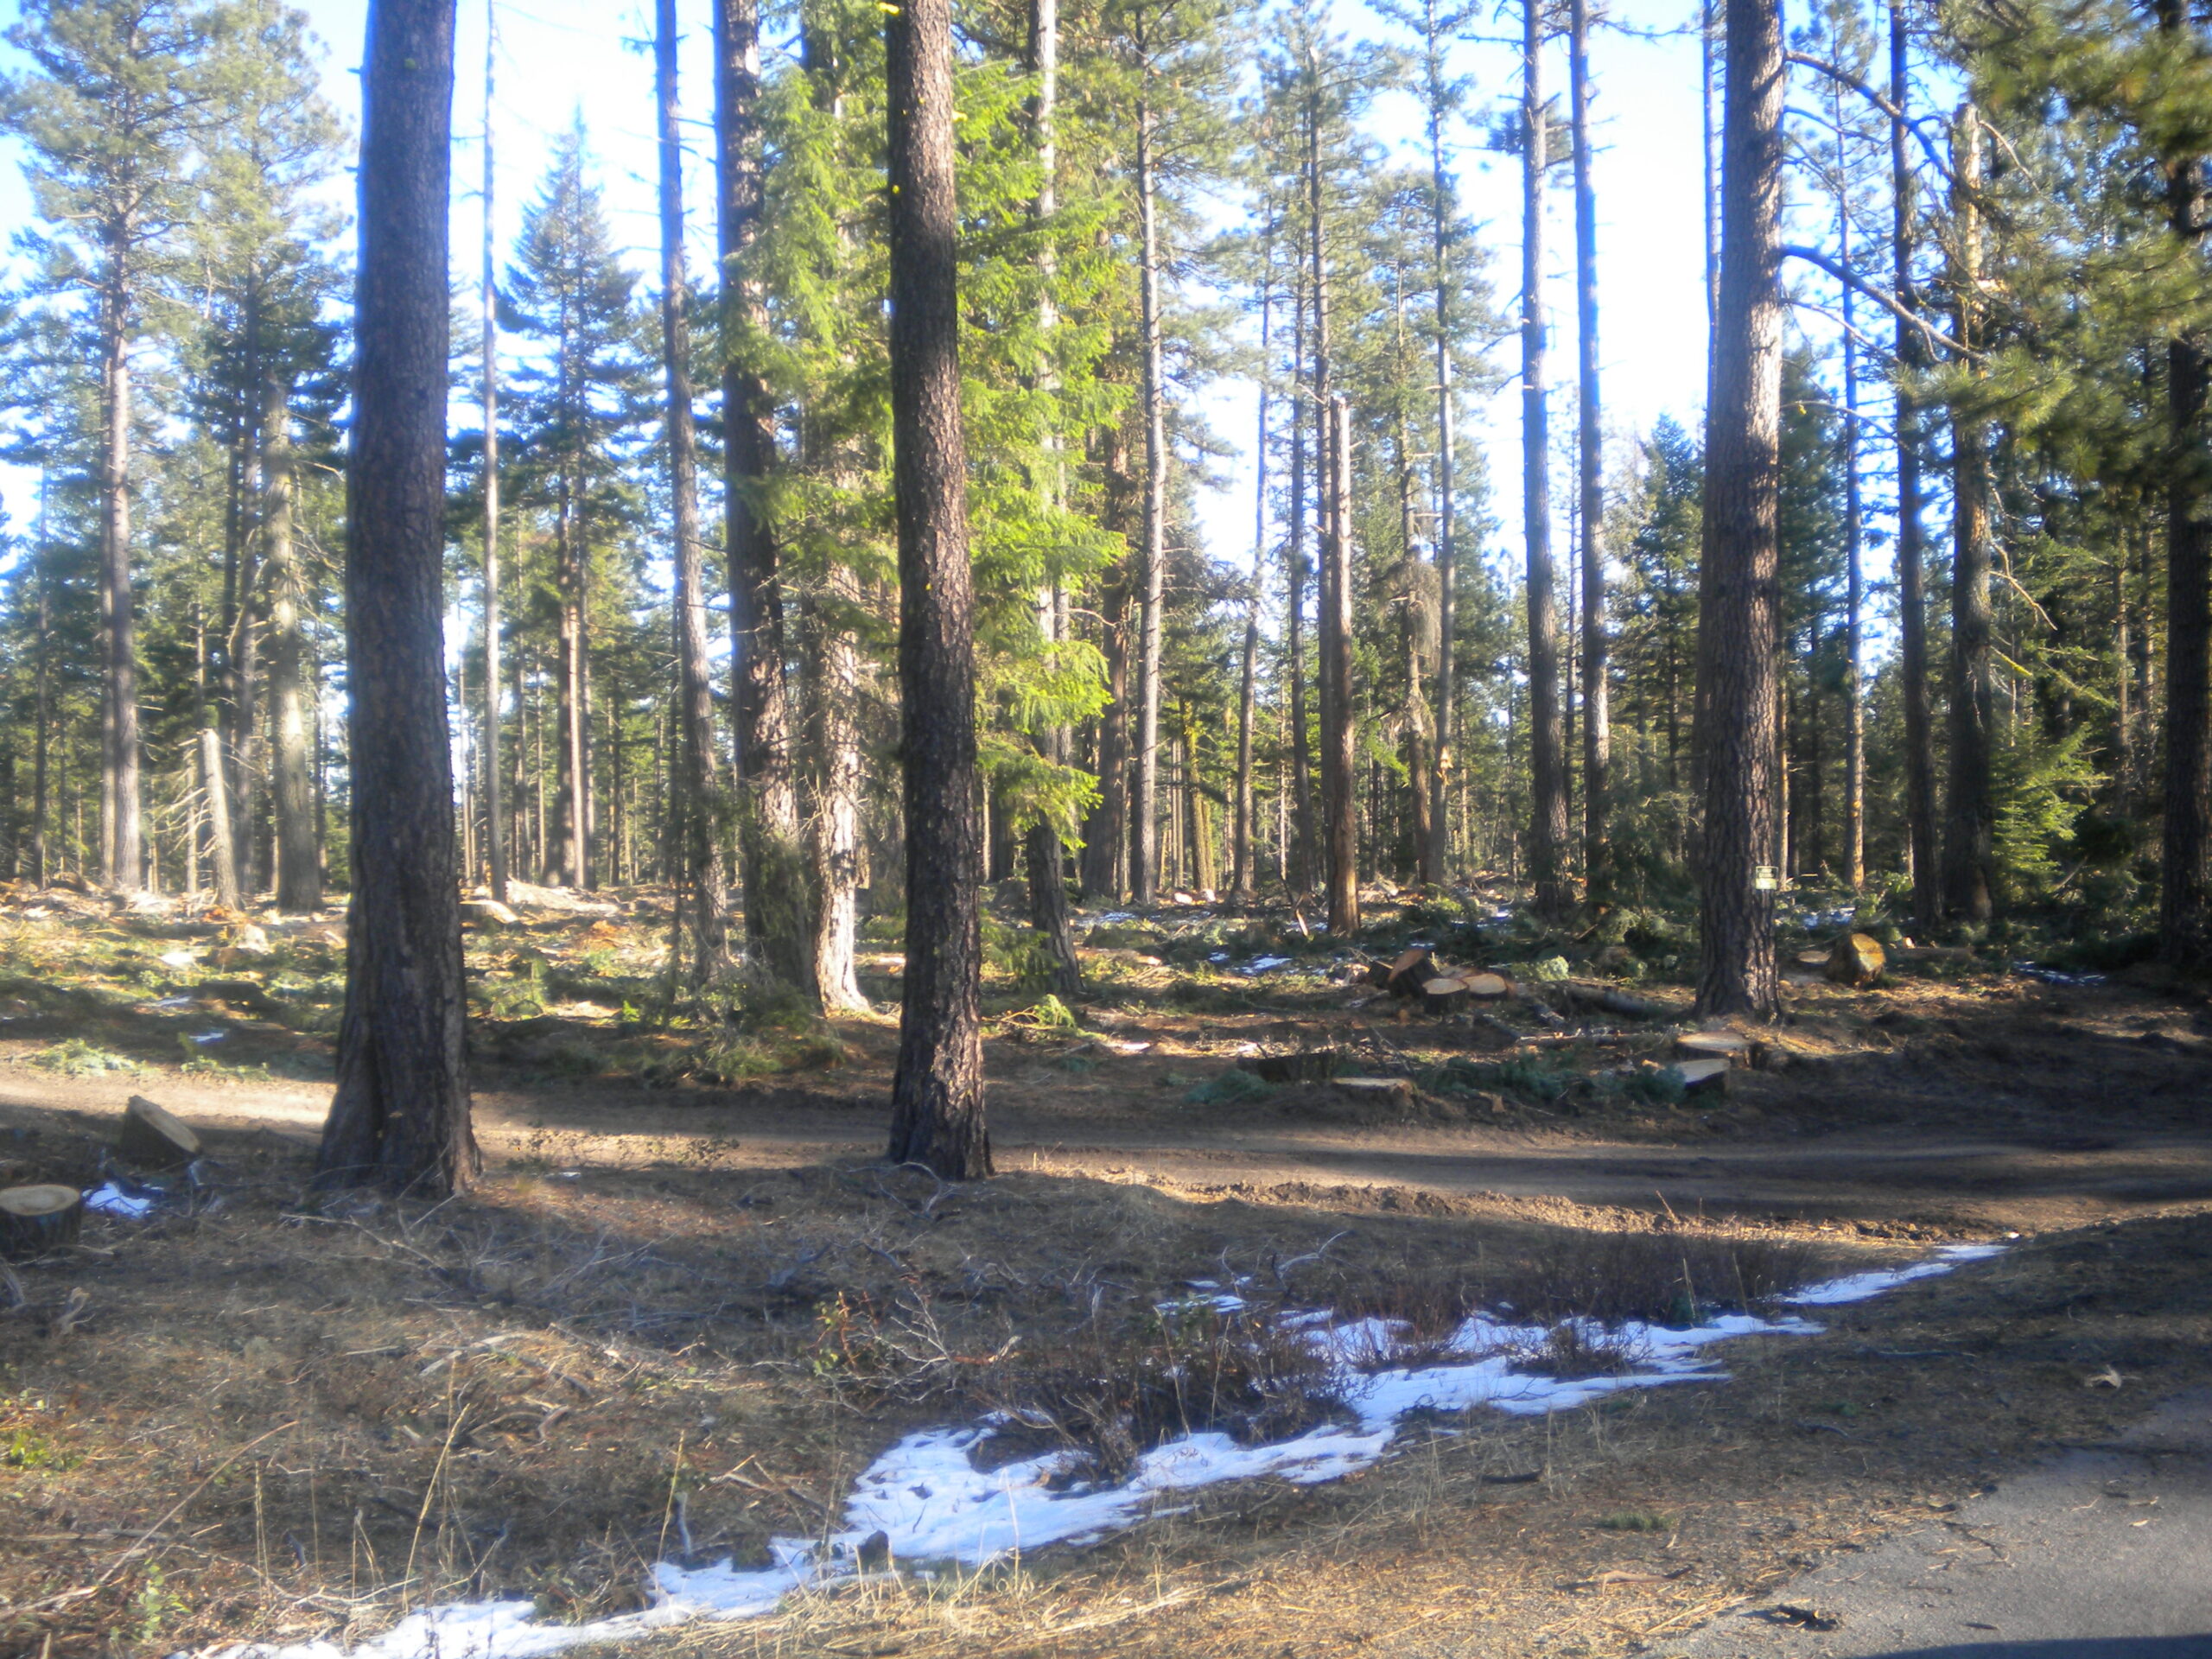 There is a little stream of snow in the front of a dry forest.